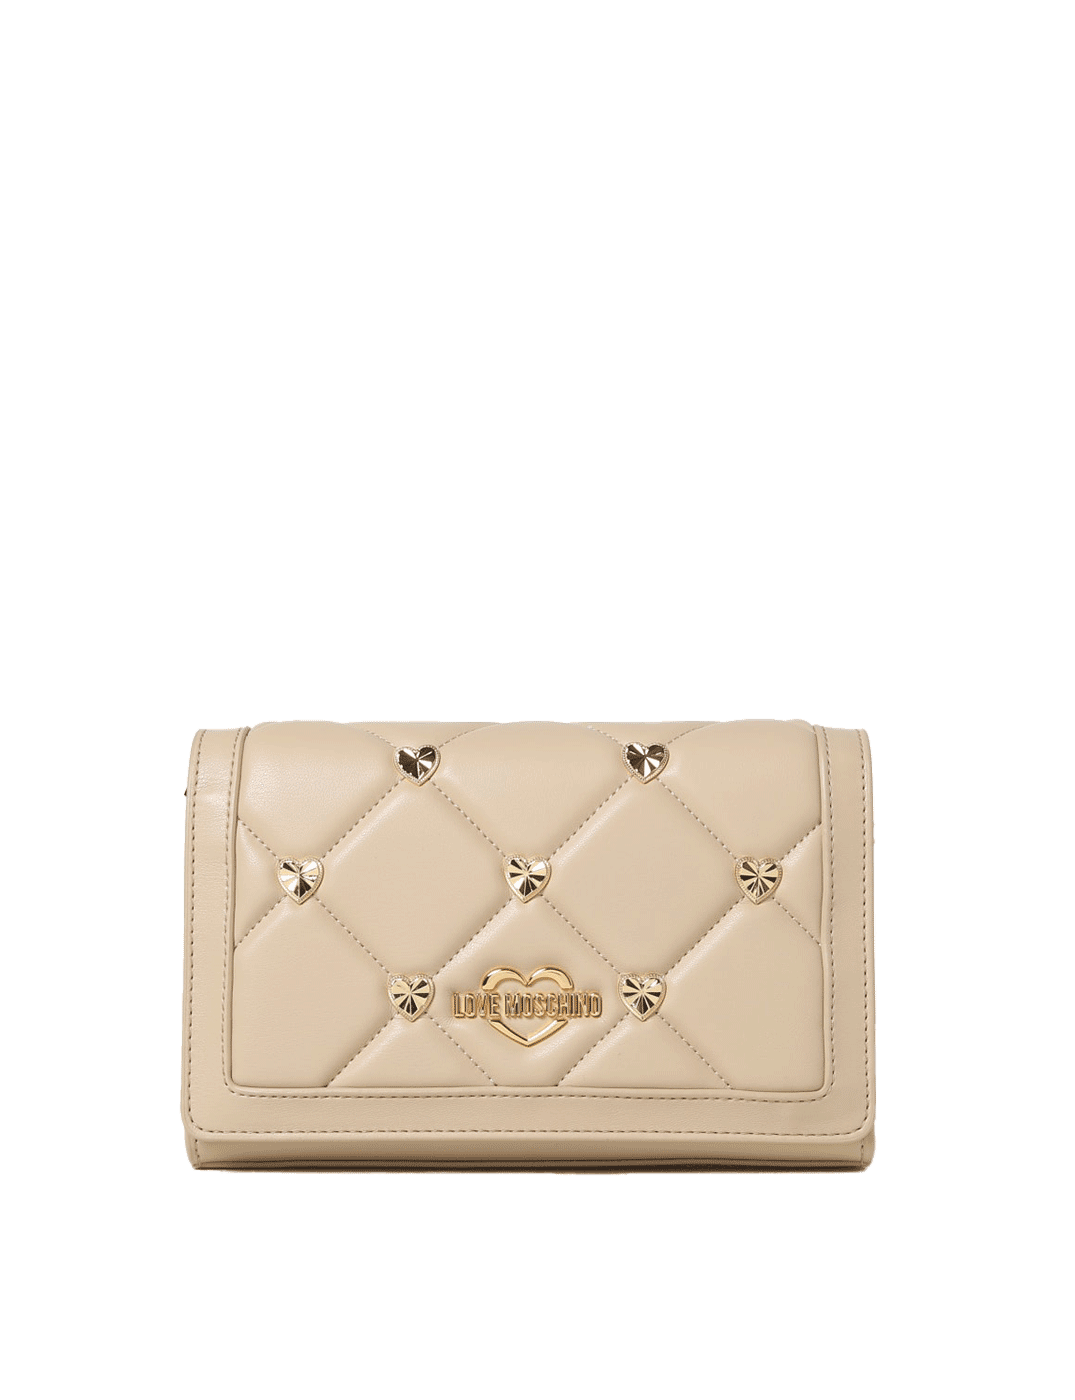 Buy Love Moschino Bags That Make Luxury More Accessible | Editorialist